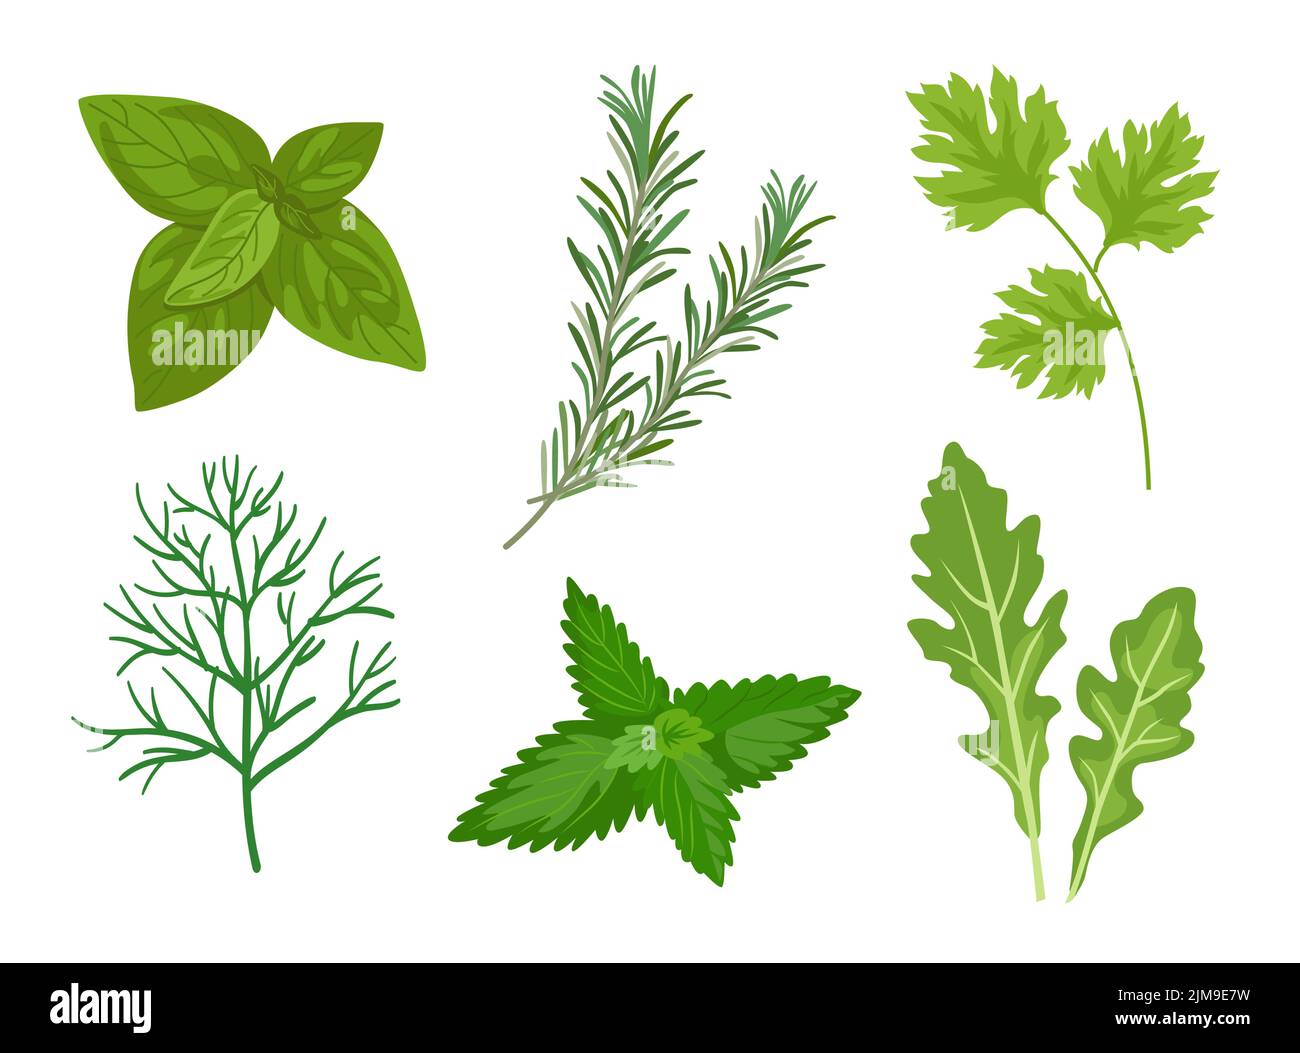 Different herbs and leaves vector illustrations set. Collection of spicy herbal plants, parsley, rosemary, coriander, oregano, mint on white backgroun Stock Vector